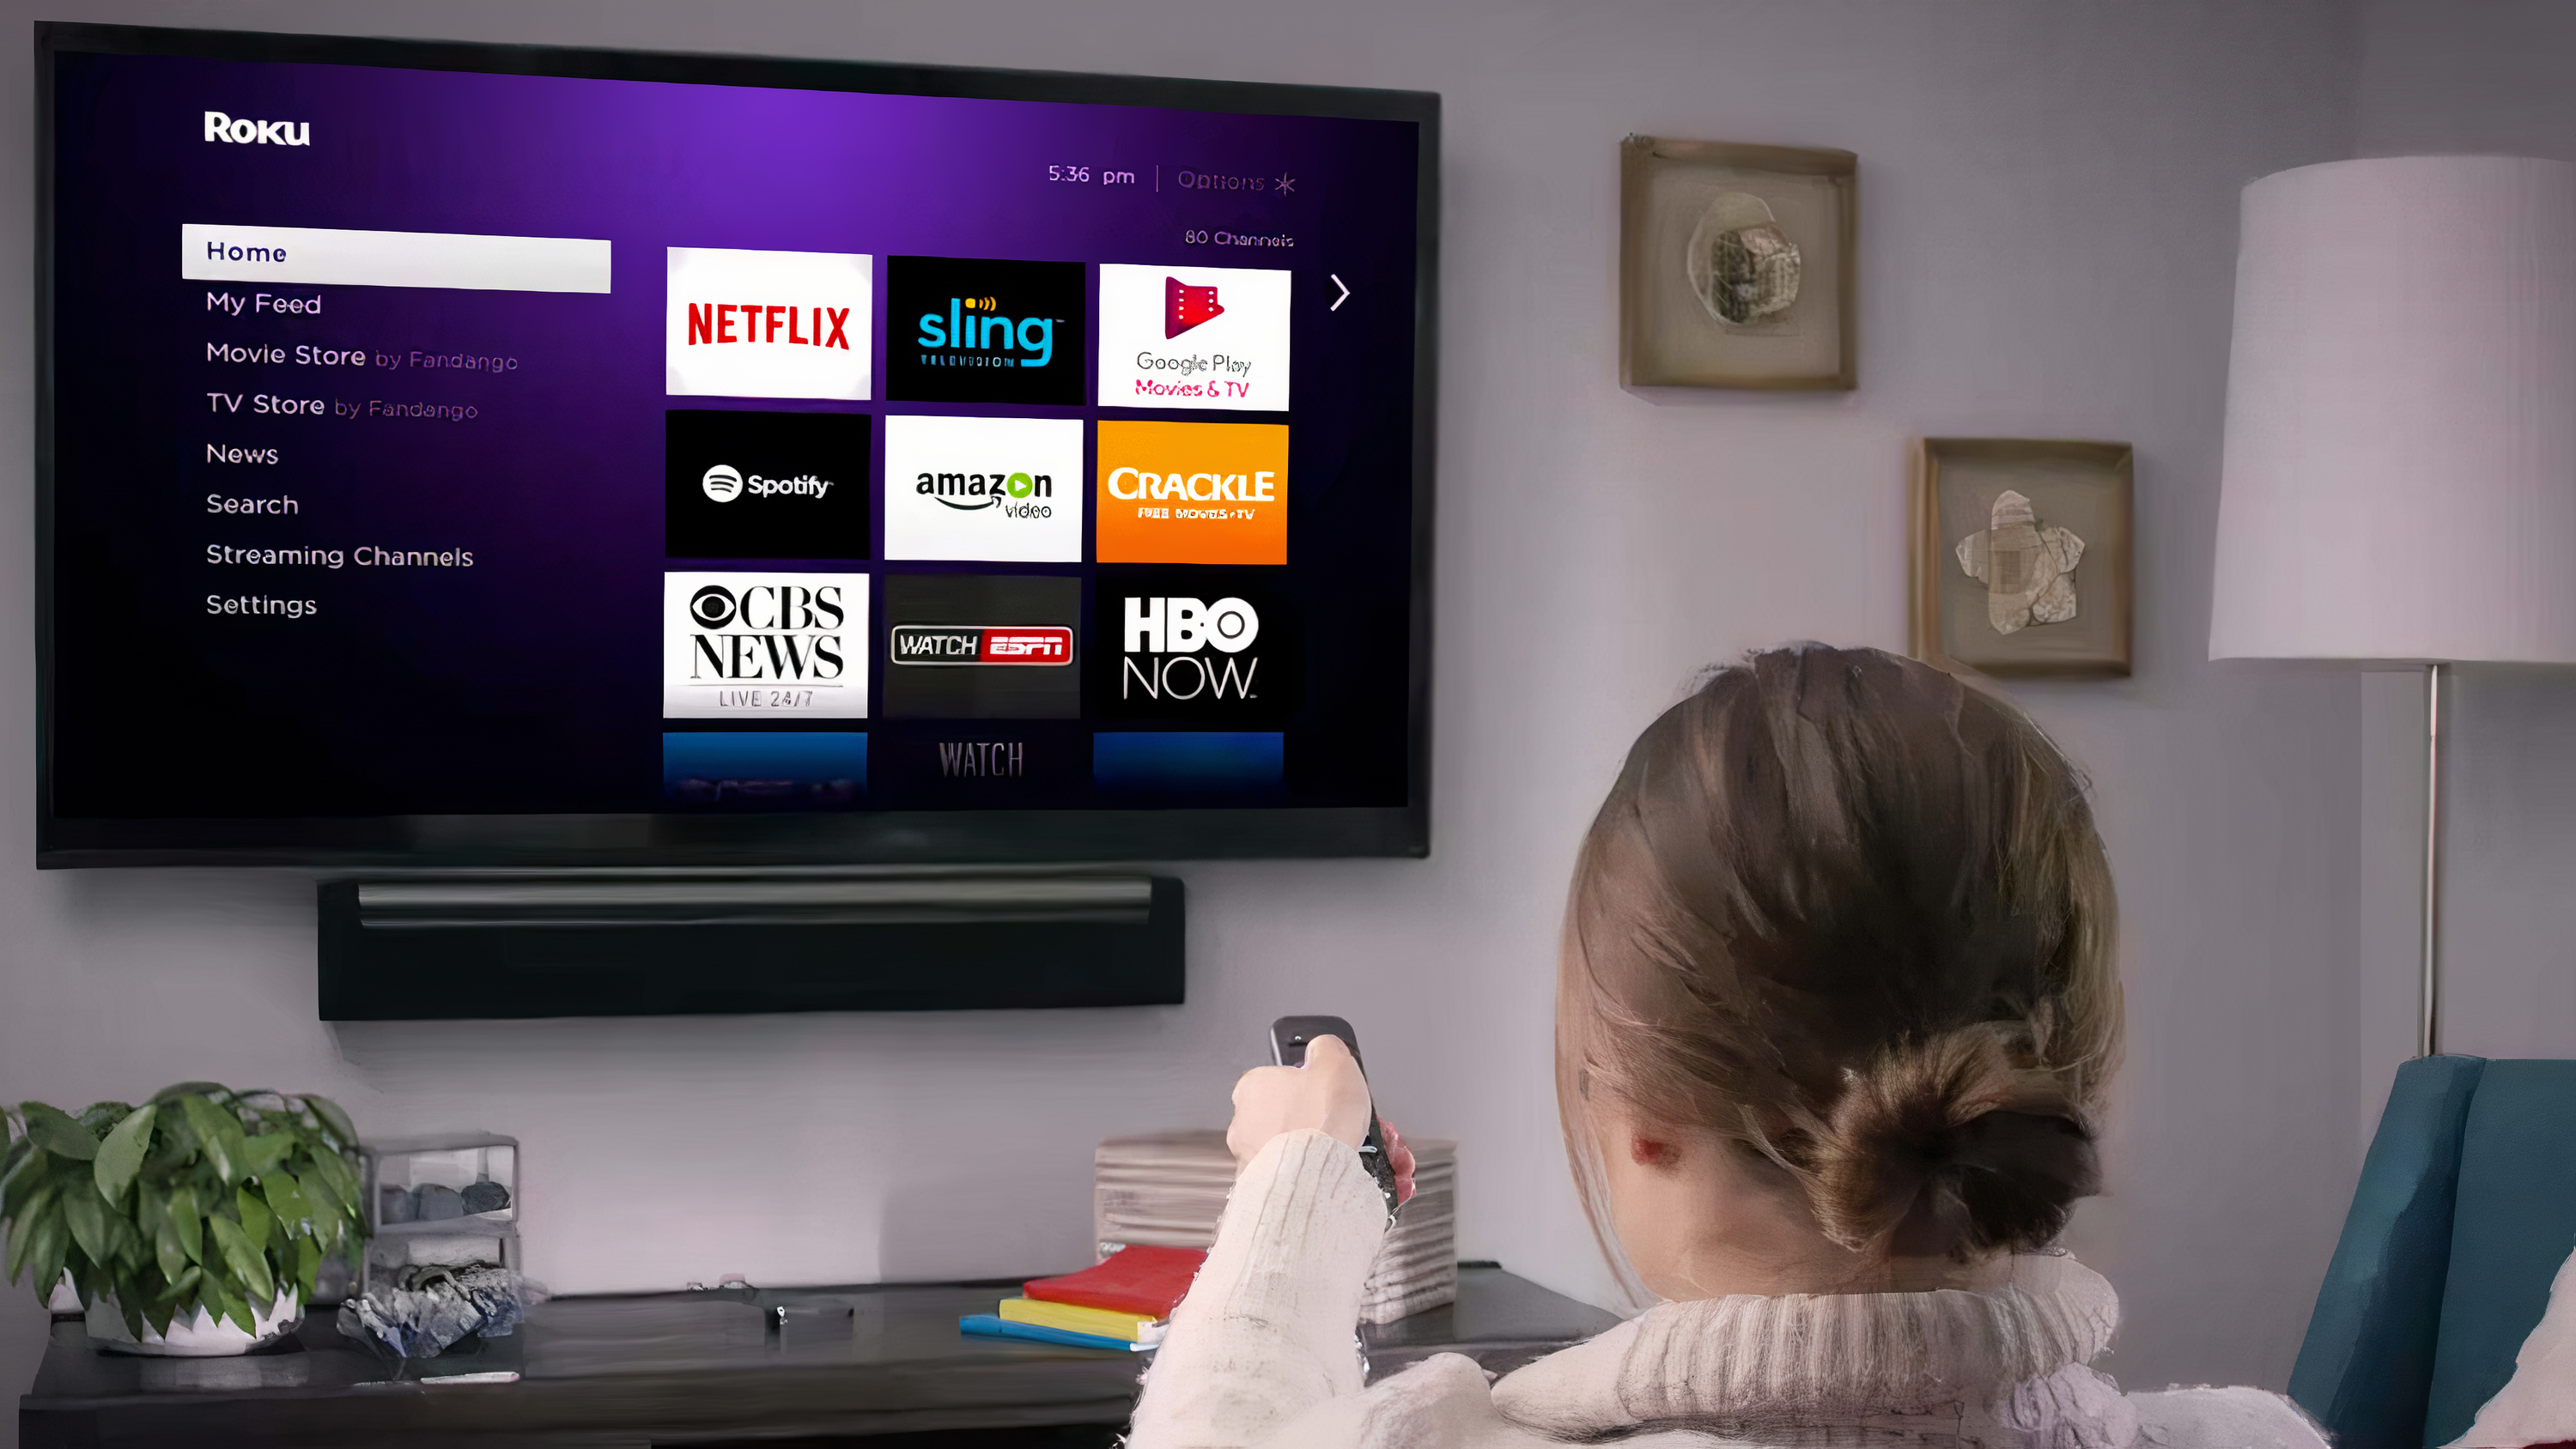 Roku User Research Project By Speck